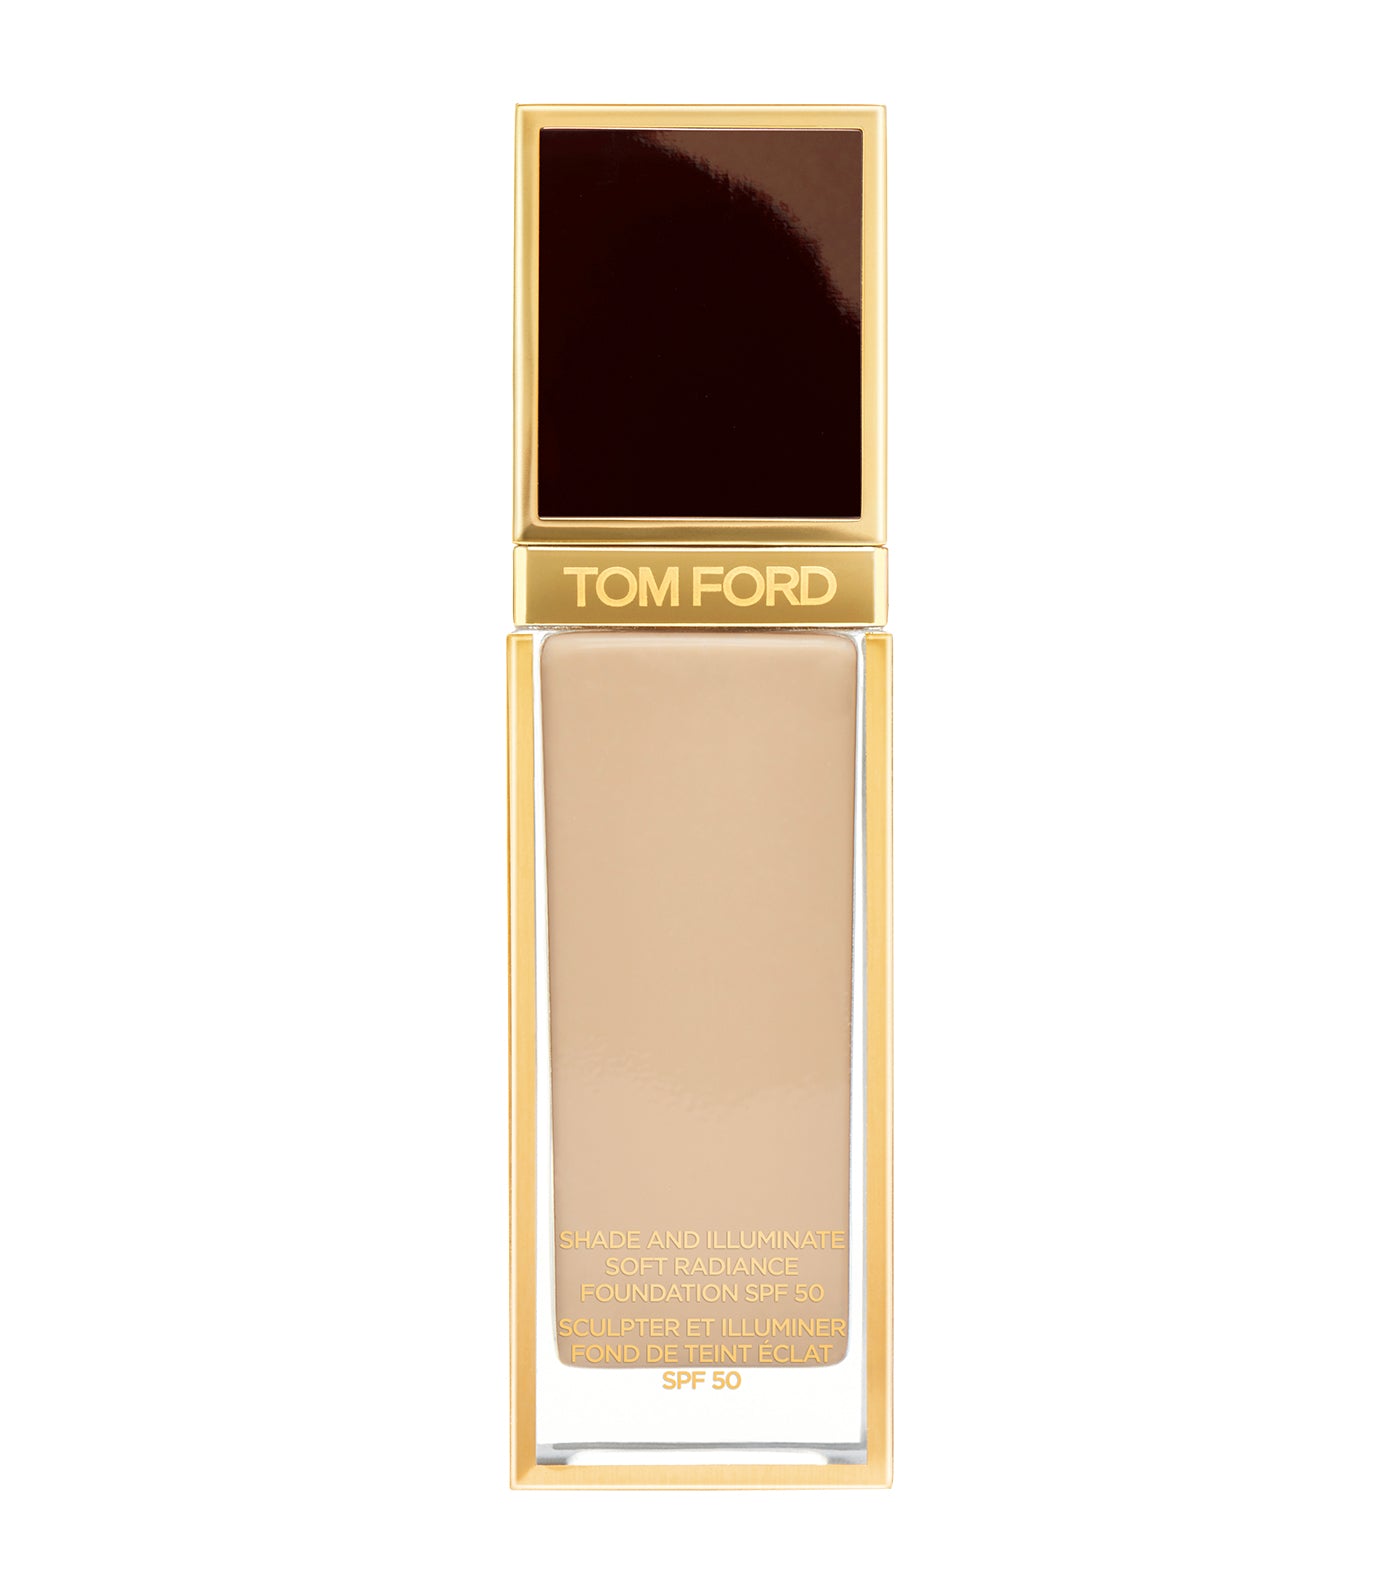 tom ford shade and illuminate soft radiance foundation spf 50/pa++++ natural